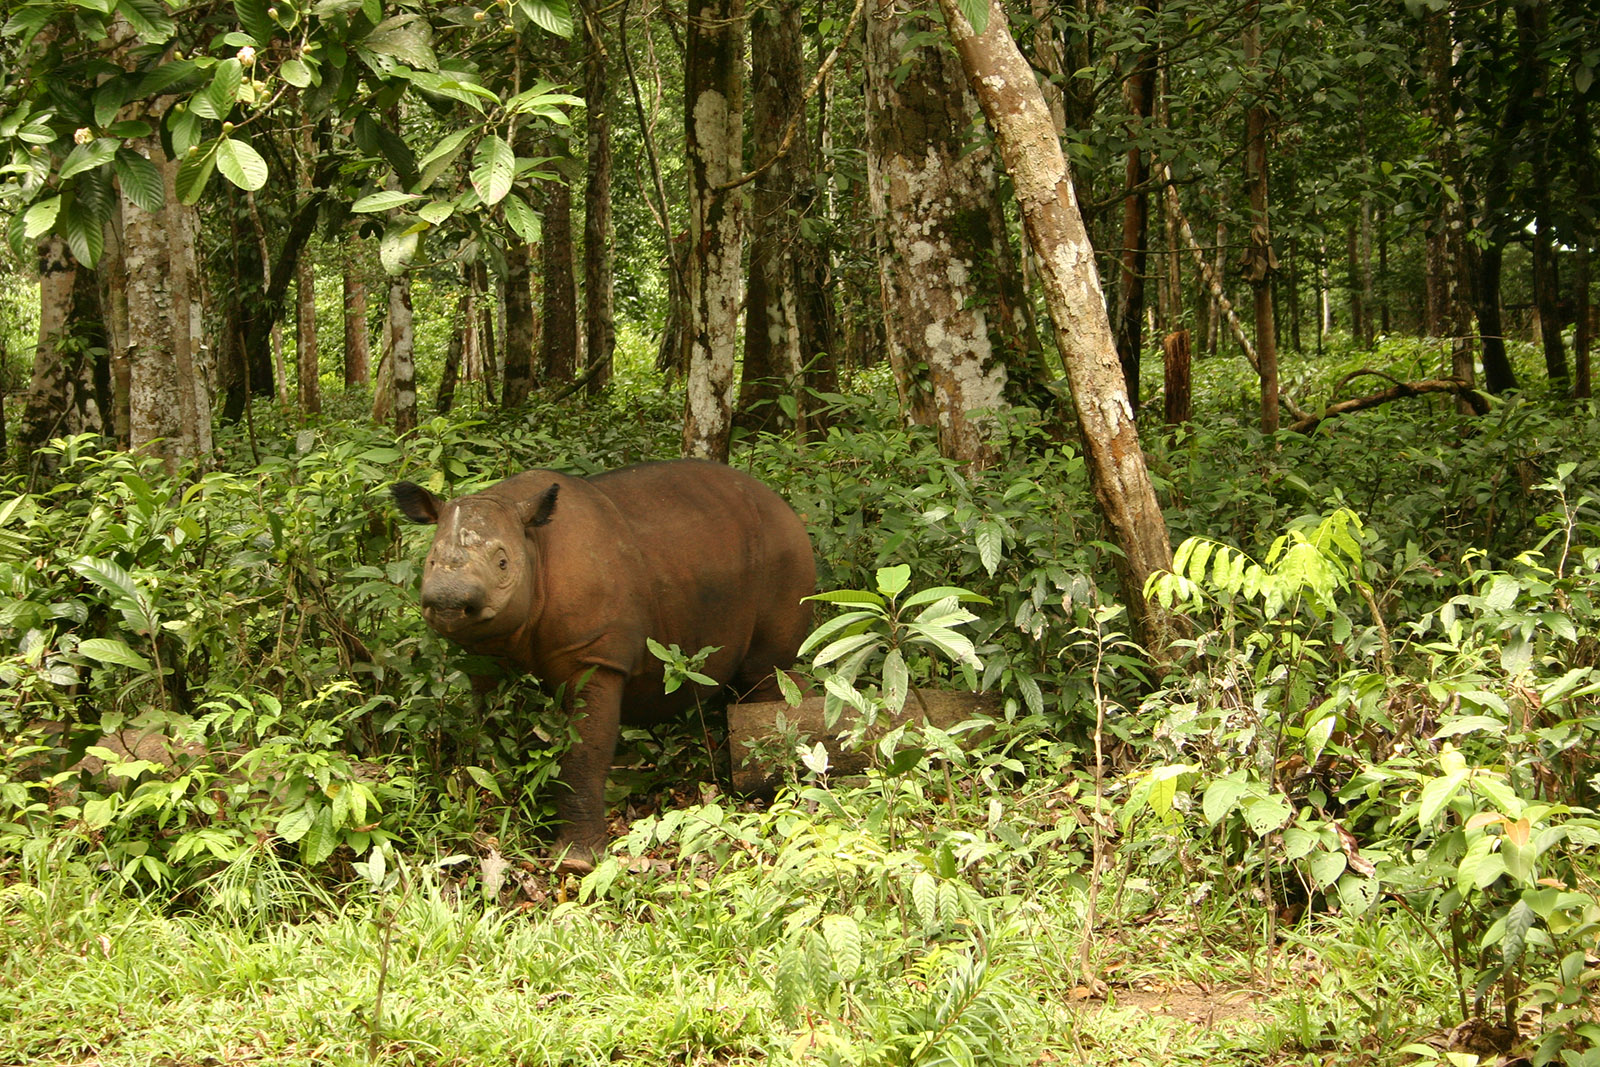 The Sumatran rhino is the smallest of the remaining rhino species, but it is critically endangered—with as few as 100 left in the wild today.